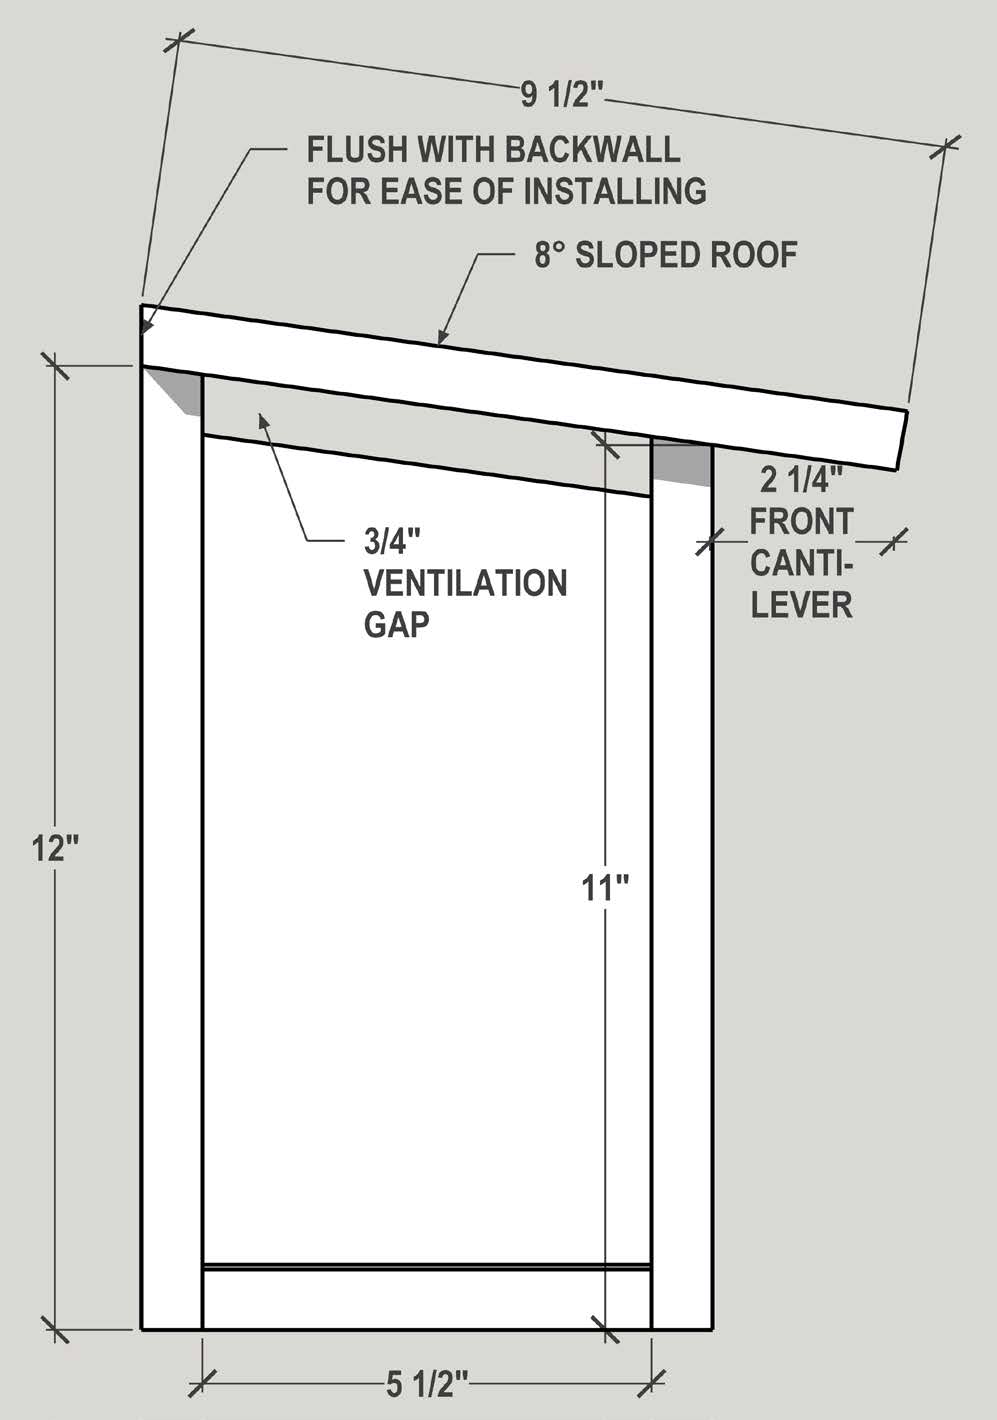 Flush with backwall for ease of installing, 8 degree sloped roof, 3/4" ventilation gap.